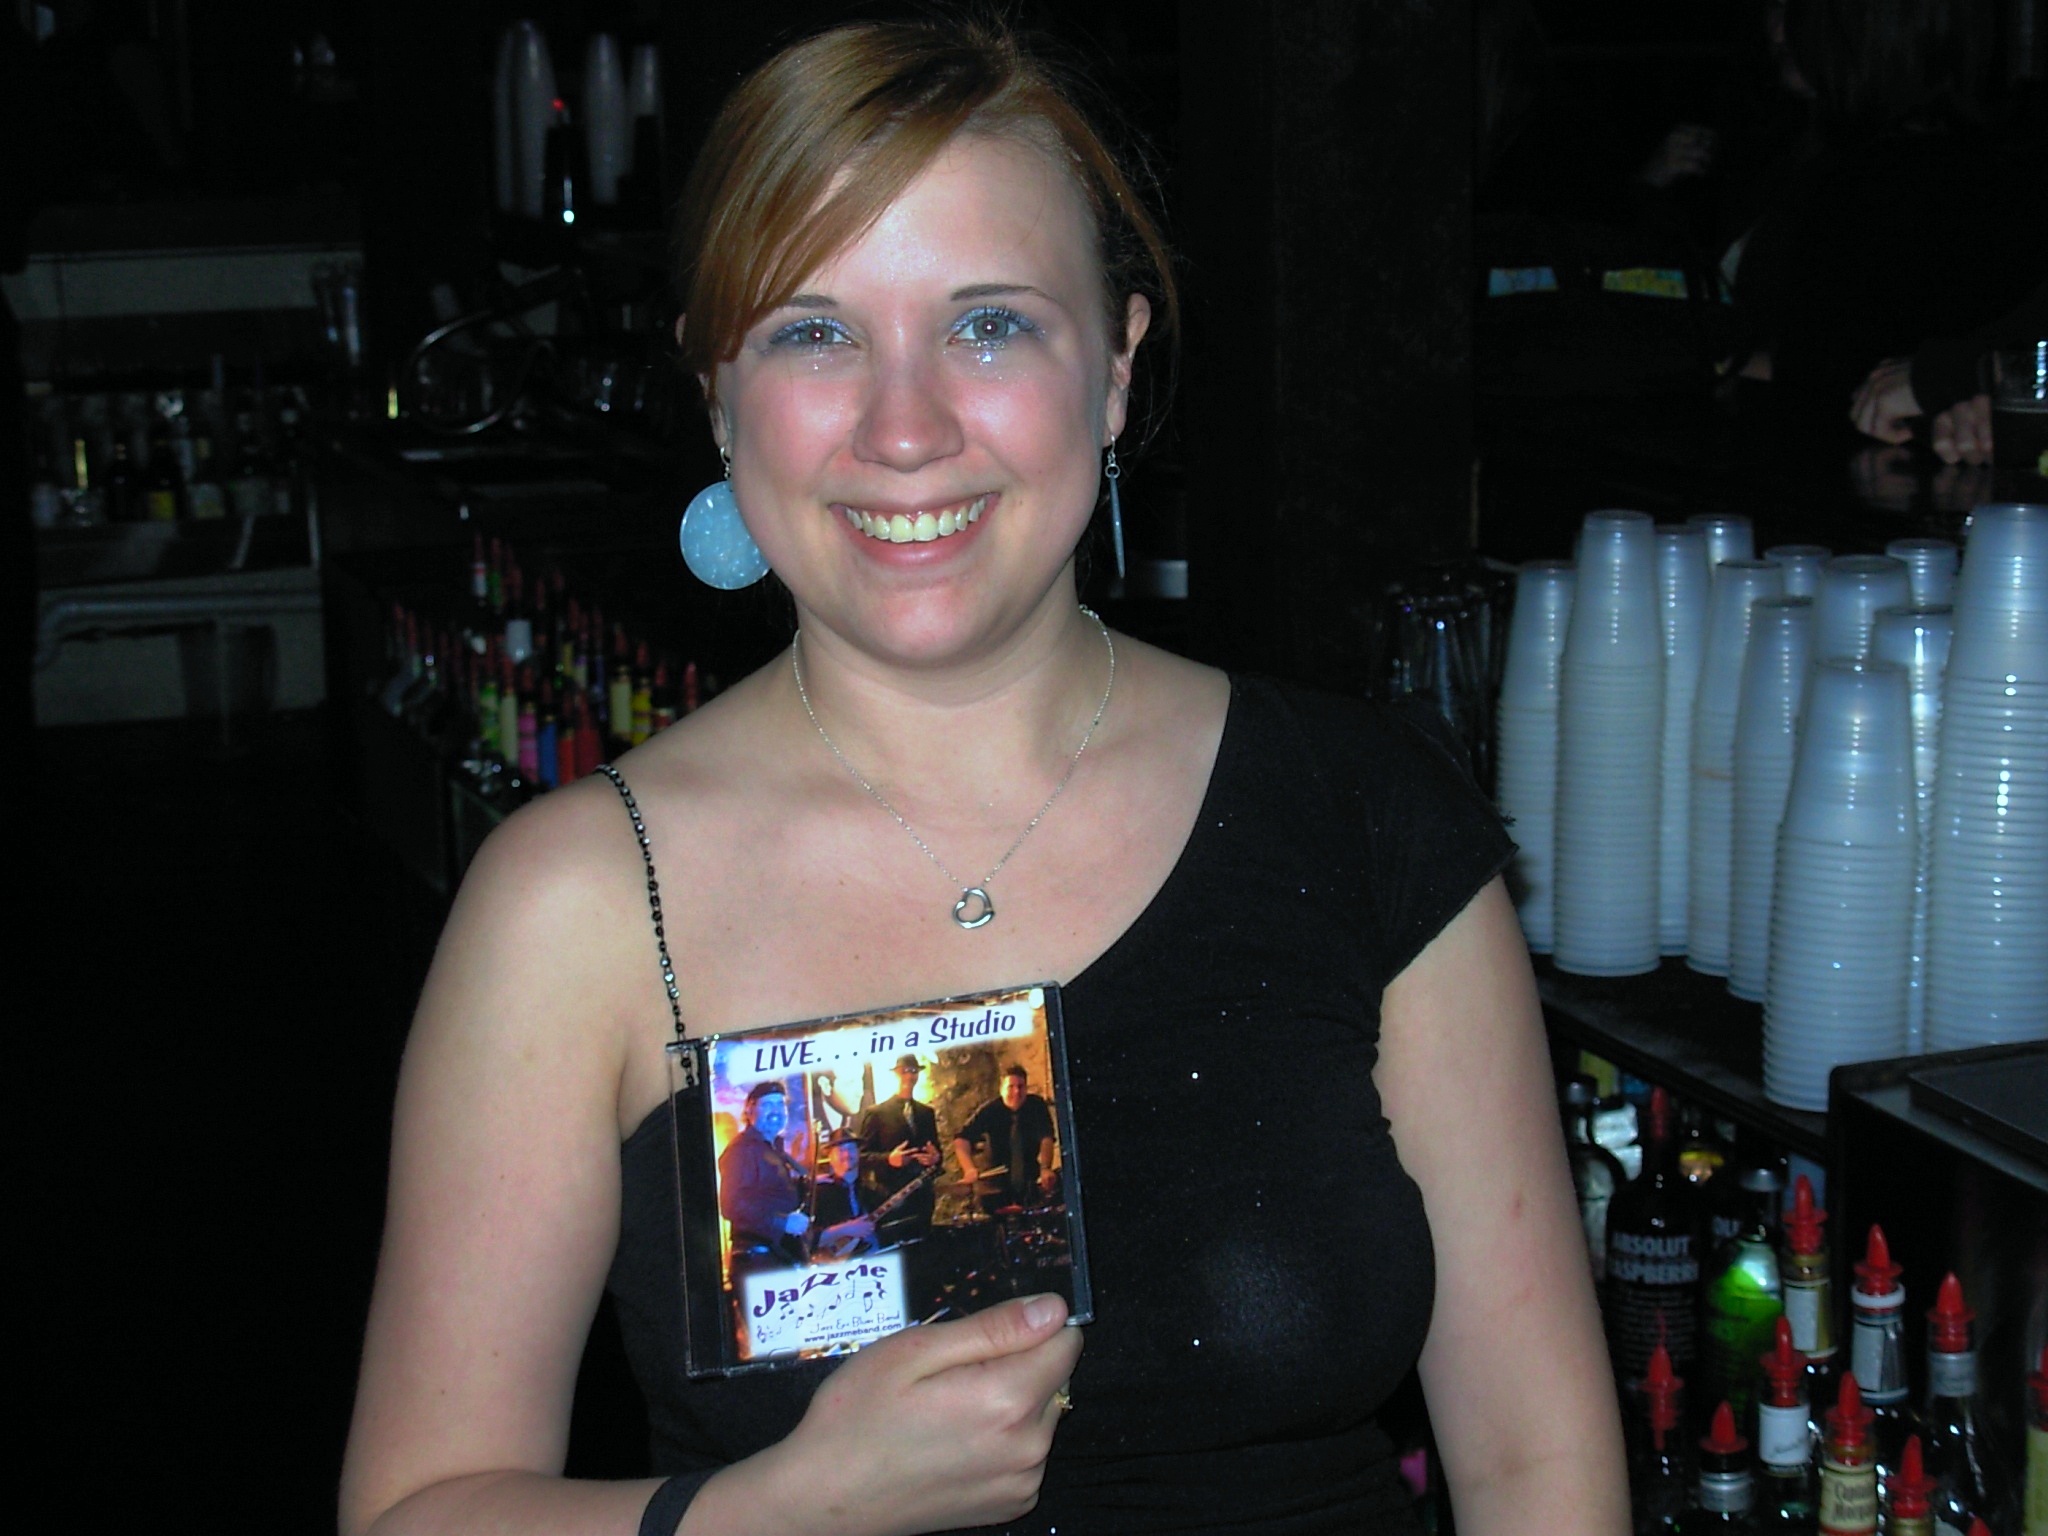 Jenn get's her copy of the new Jazz Me Release "Live in the Studio"
the Quarter was better when Jen's around.....
